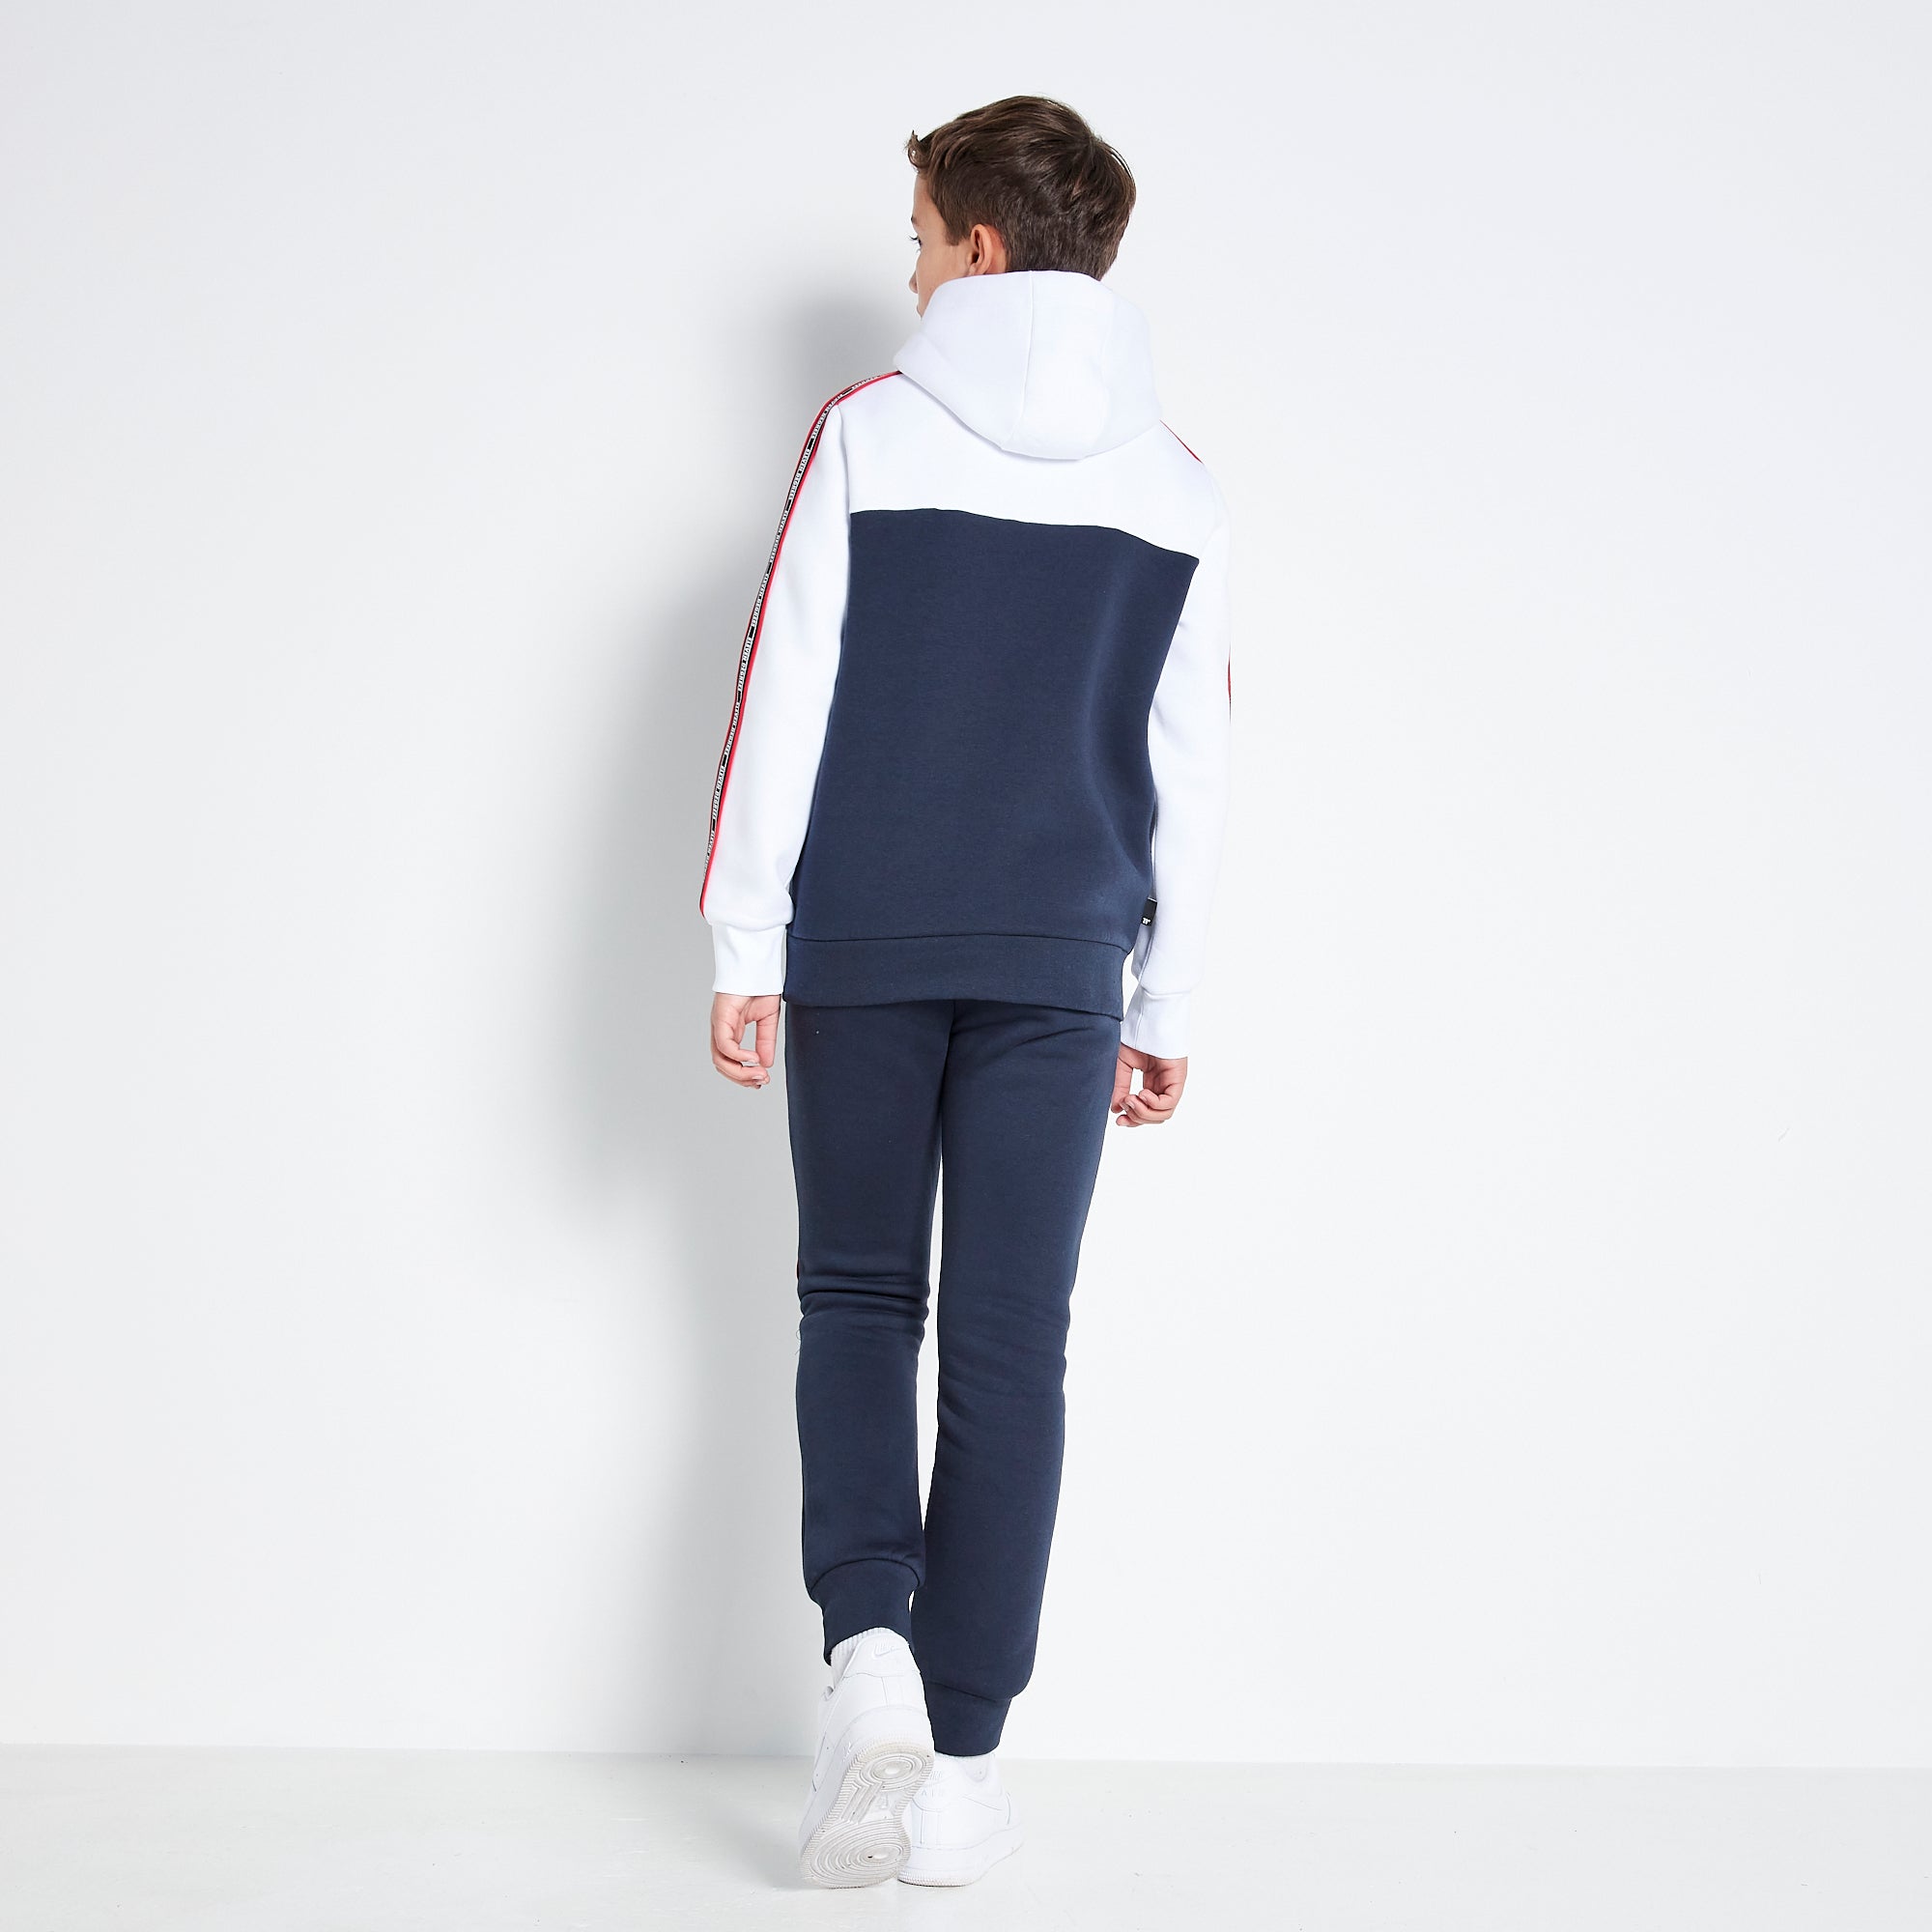 Colour Block Taped Junior Hoodie - Navy/White-Back view